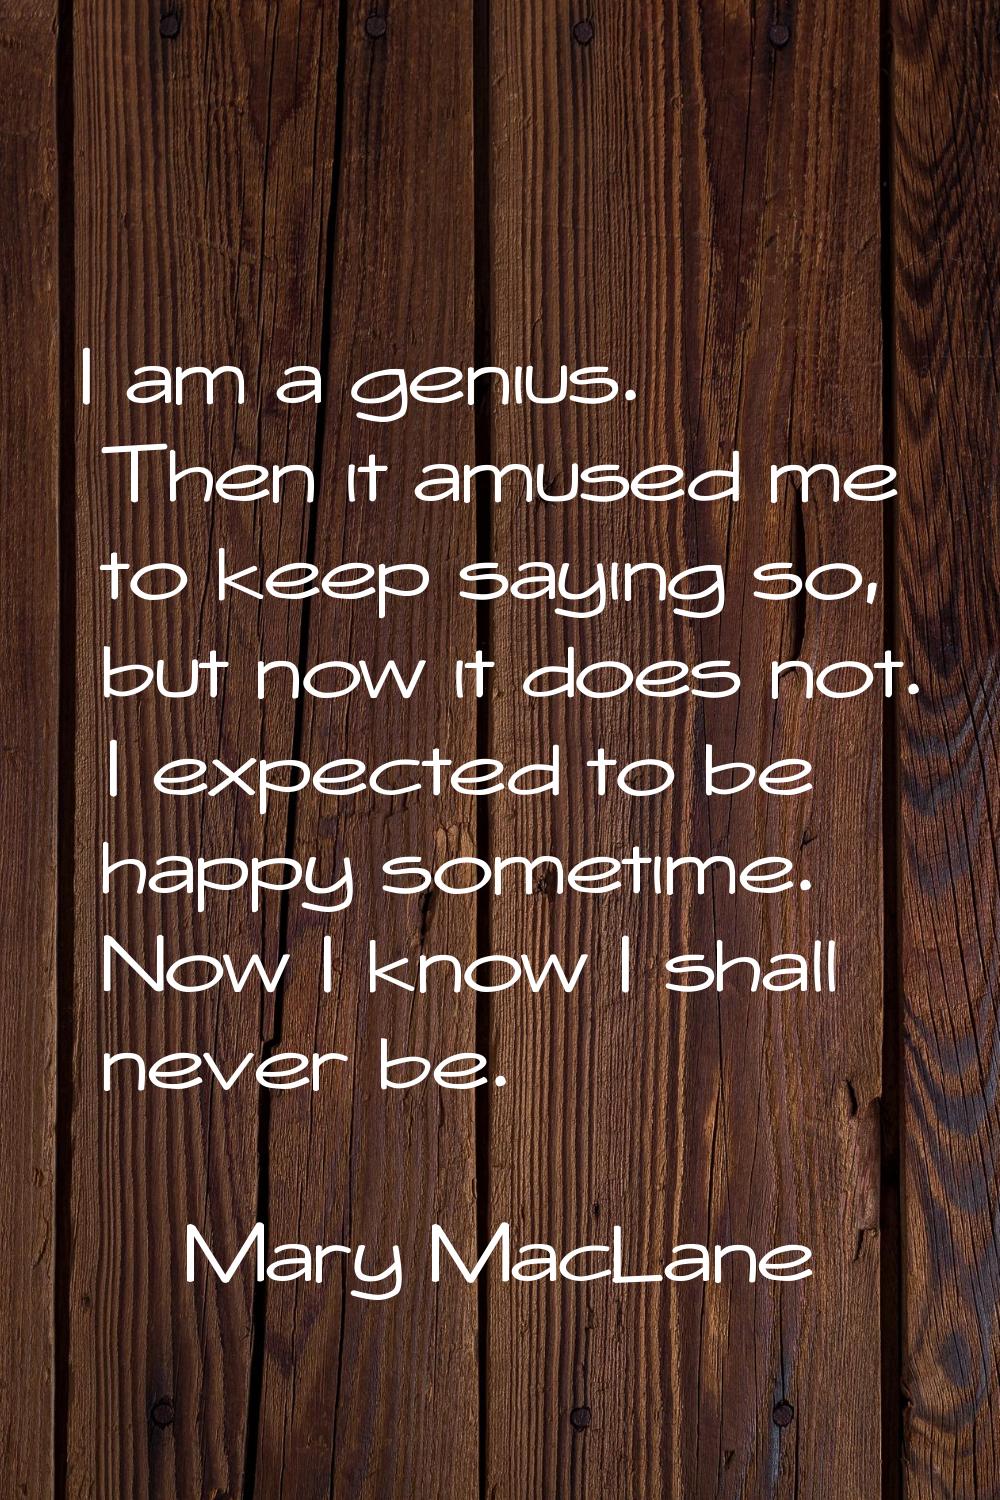 I am a genius. Then it amused me to keep saying so, but now it does not. I expected to be happy som